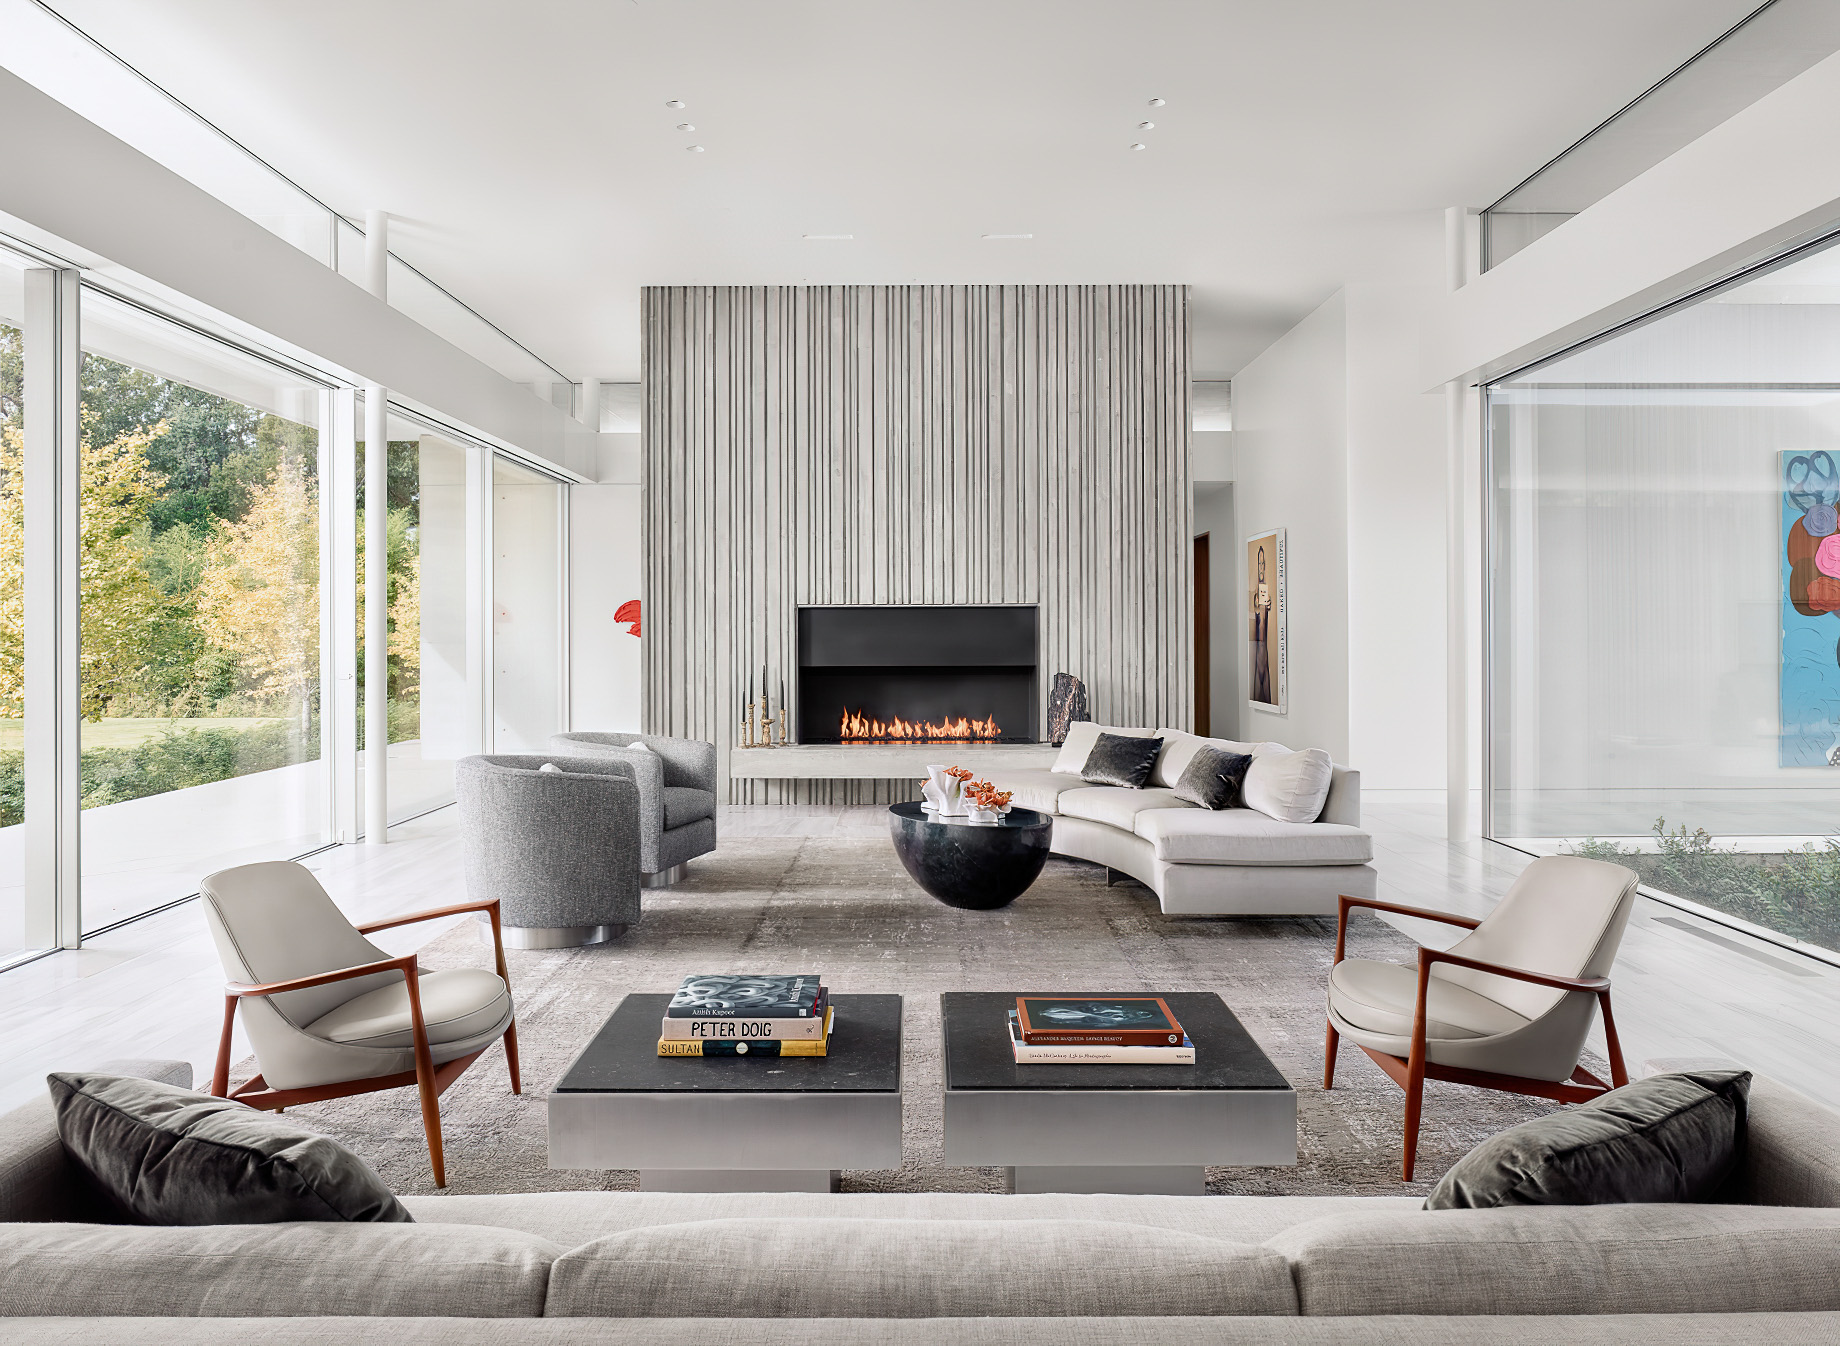 010 – Preston Hollow Brutalist Architecture Residence – Dallas, TX, USA – Living Room Fireplace View